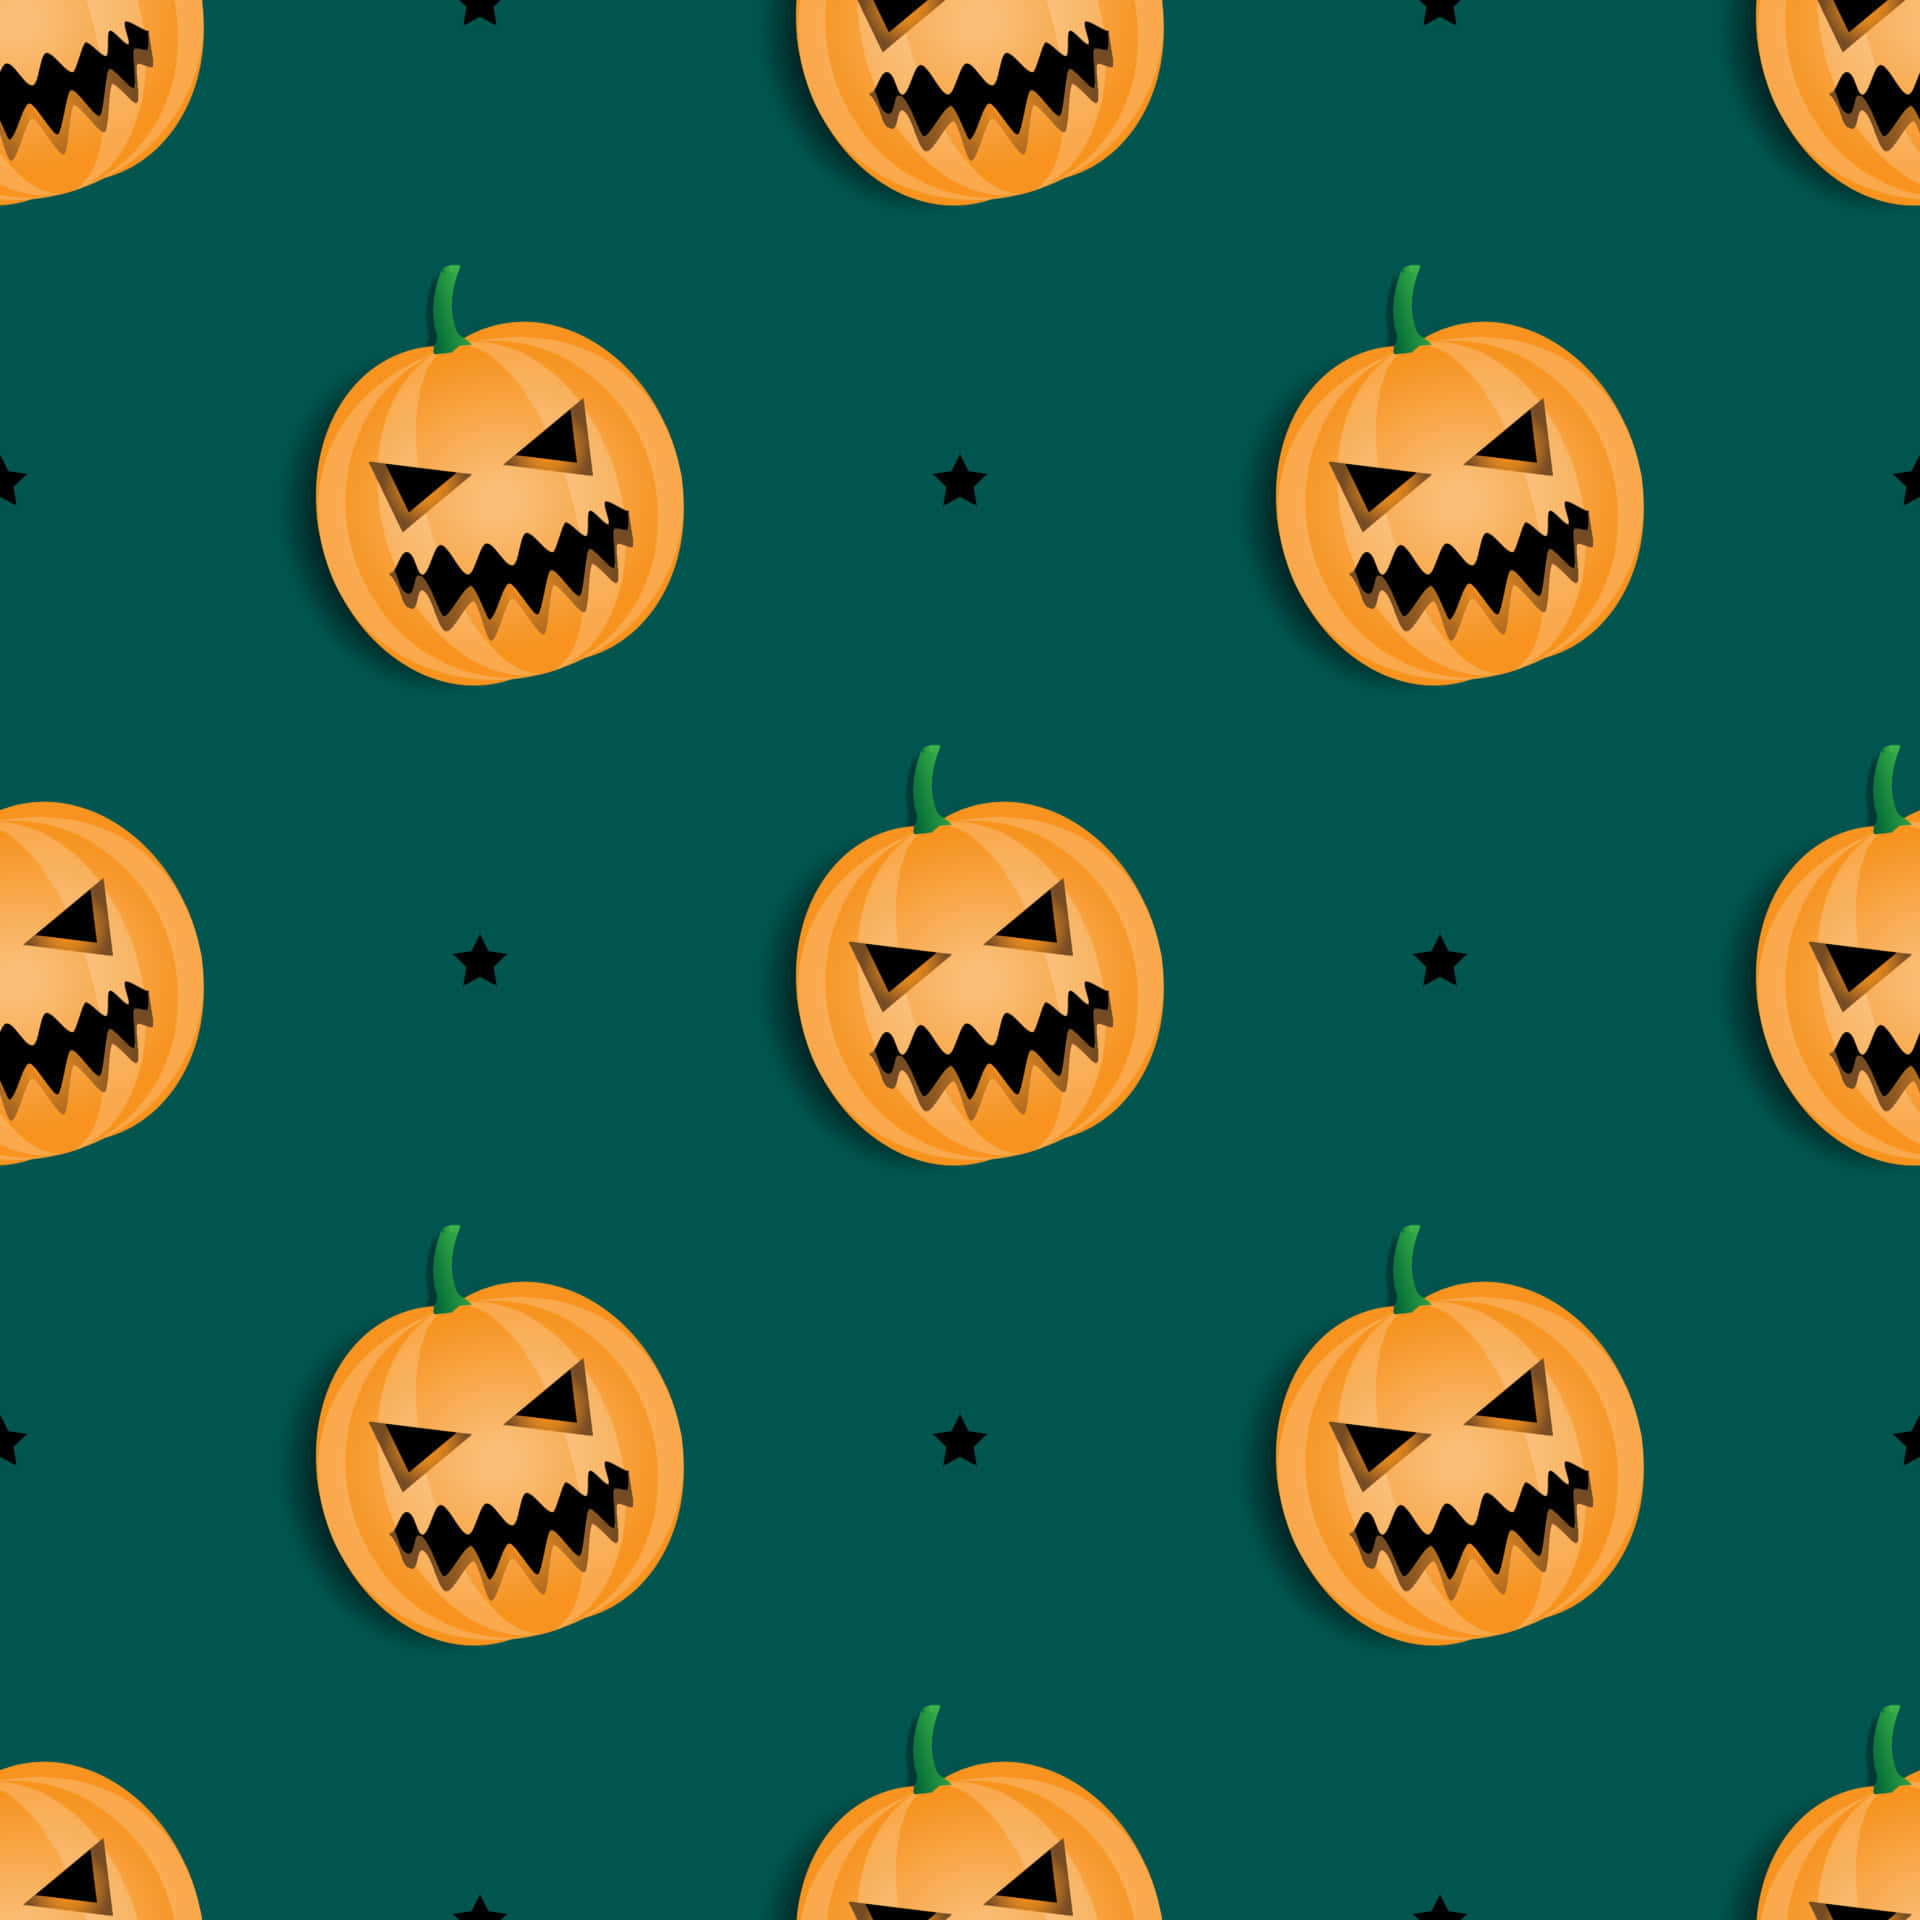 Bring the fright to your Orange Halloween with this spooky image Wallpaper